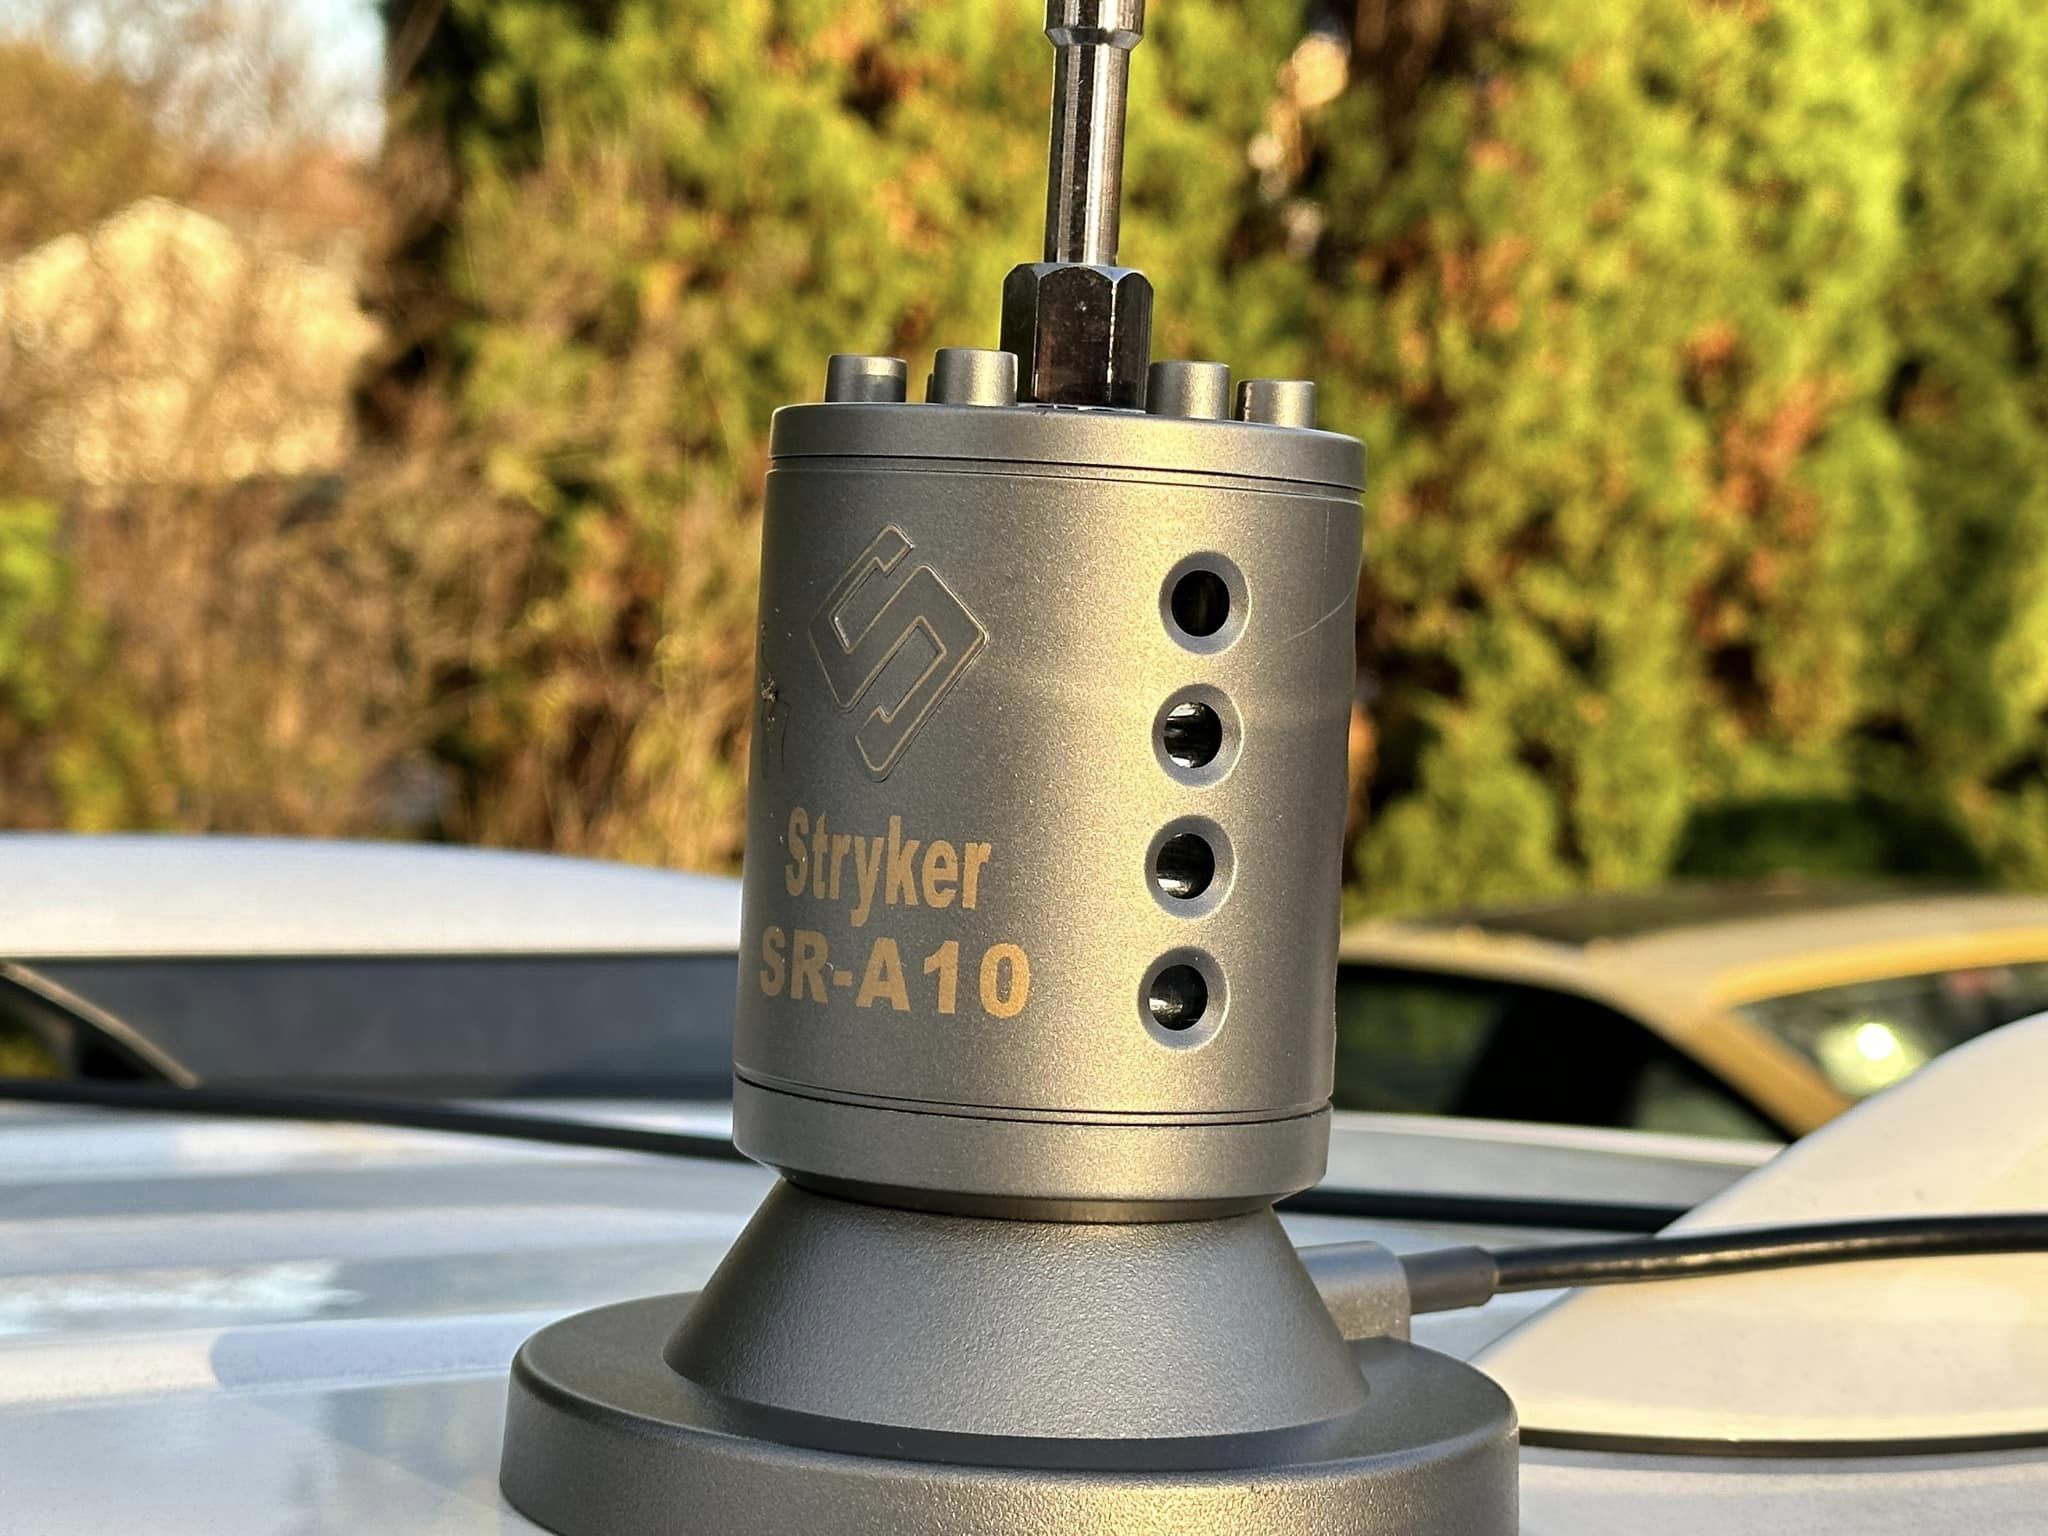 Stryker SR-A10 Magnetic Mount CB Antenna (photo courtesy of Dave White)